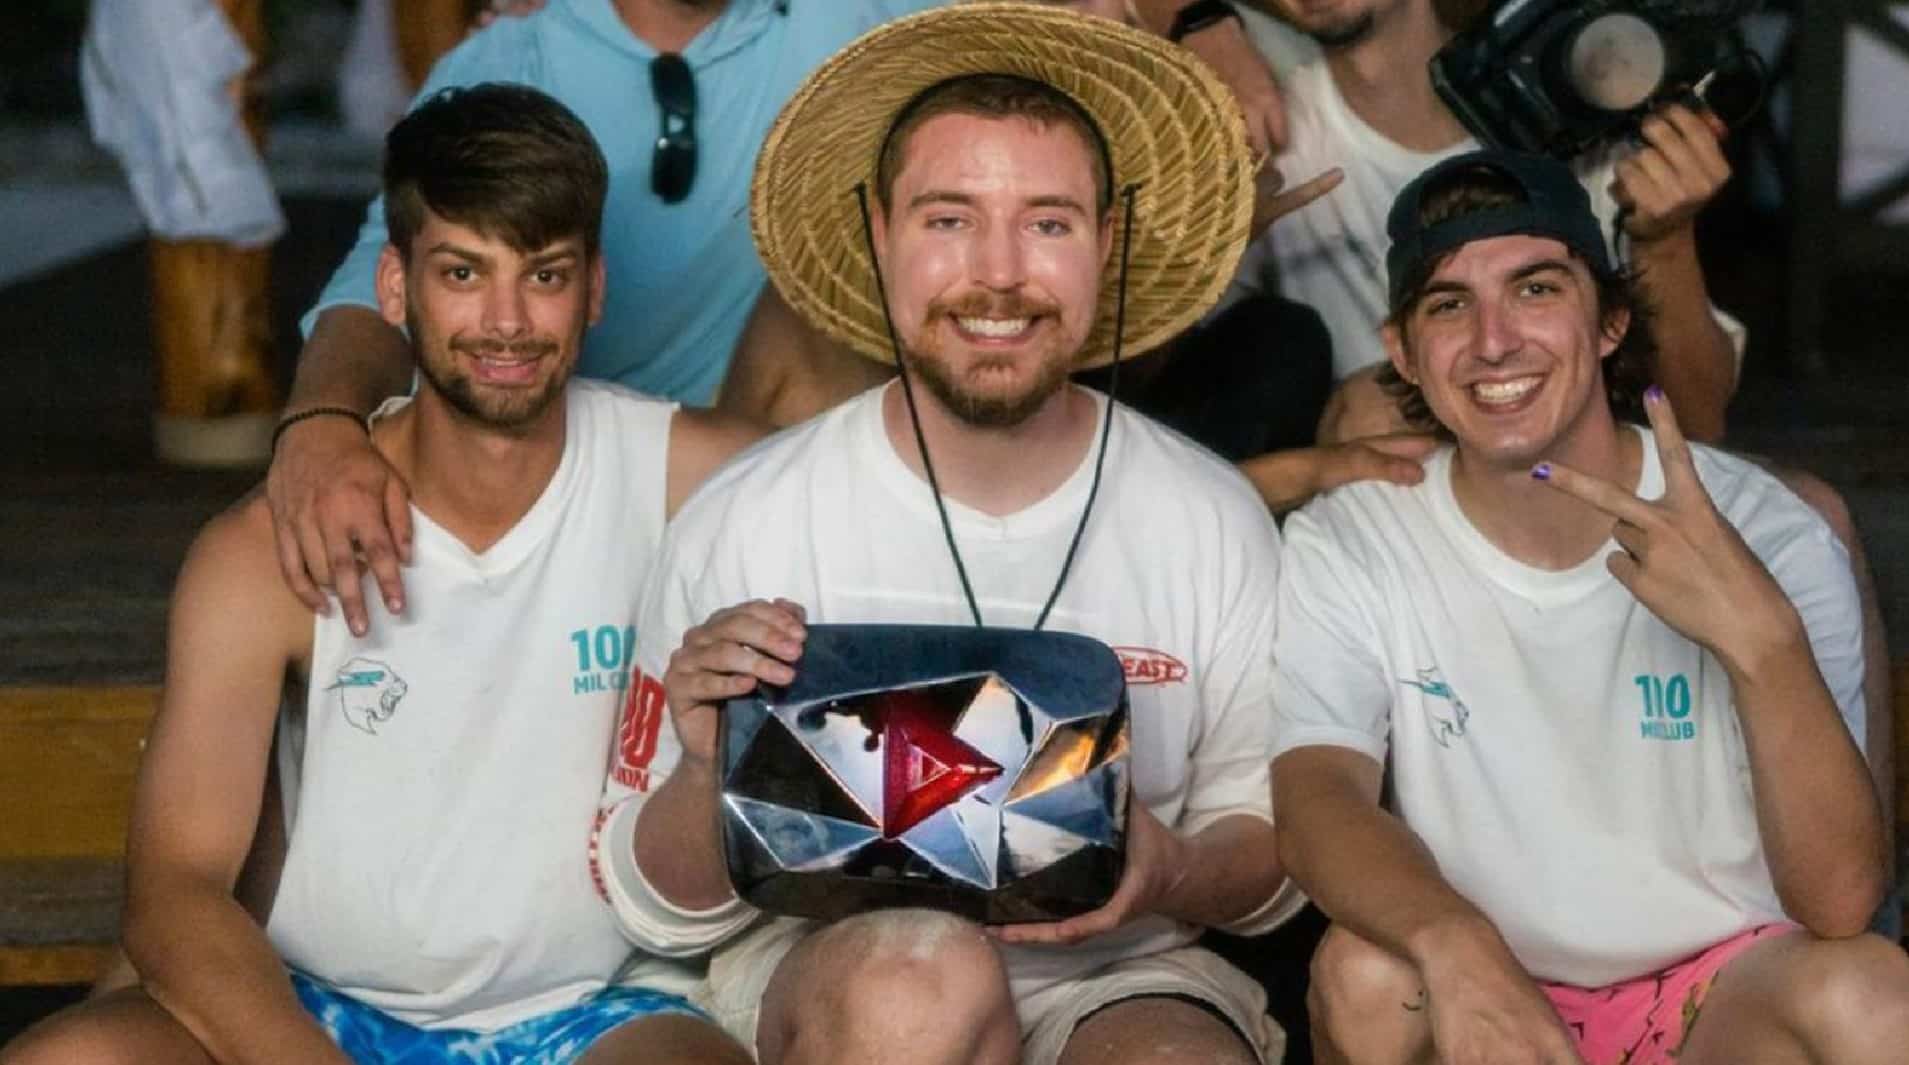 100+] Mr Beast Pictures